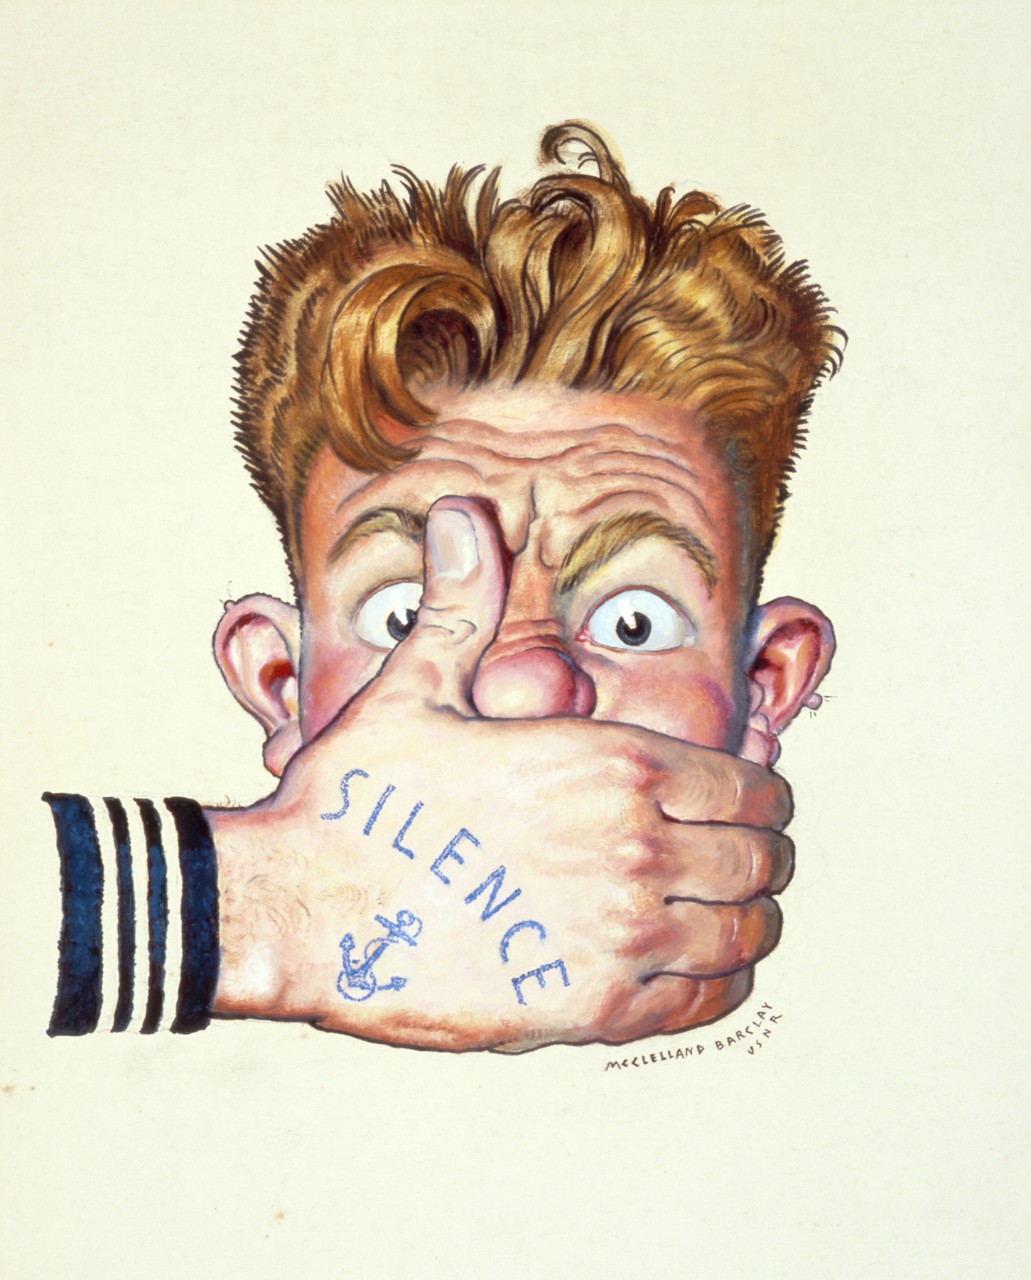 A sailor covers his mouth with his hand